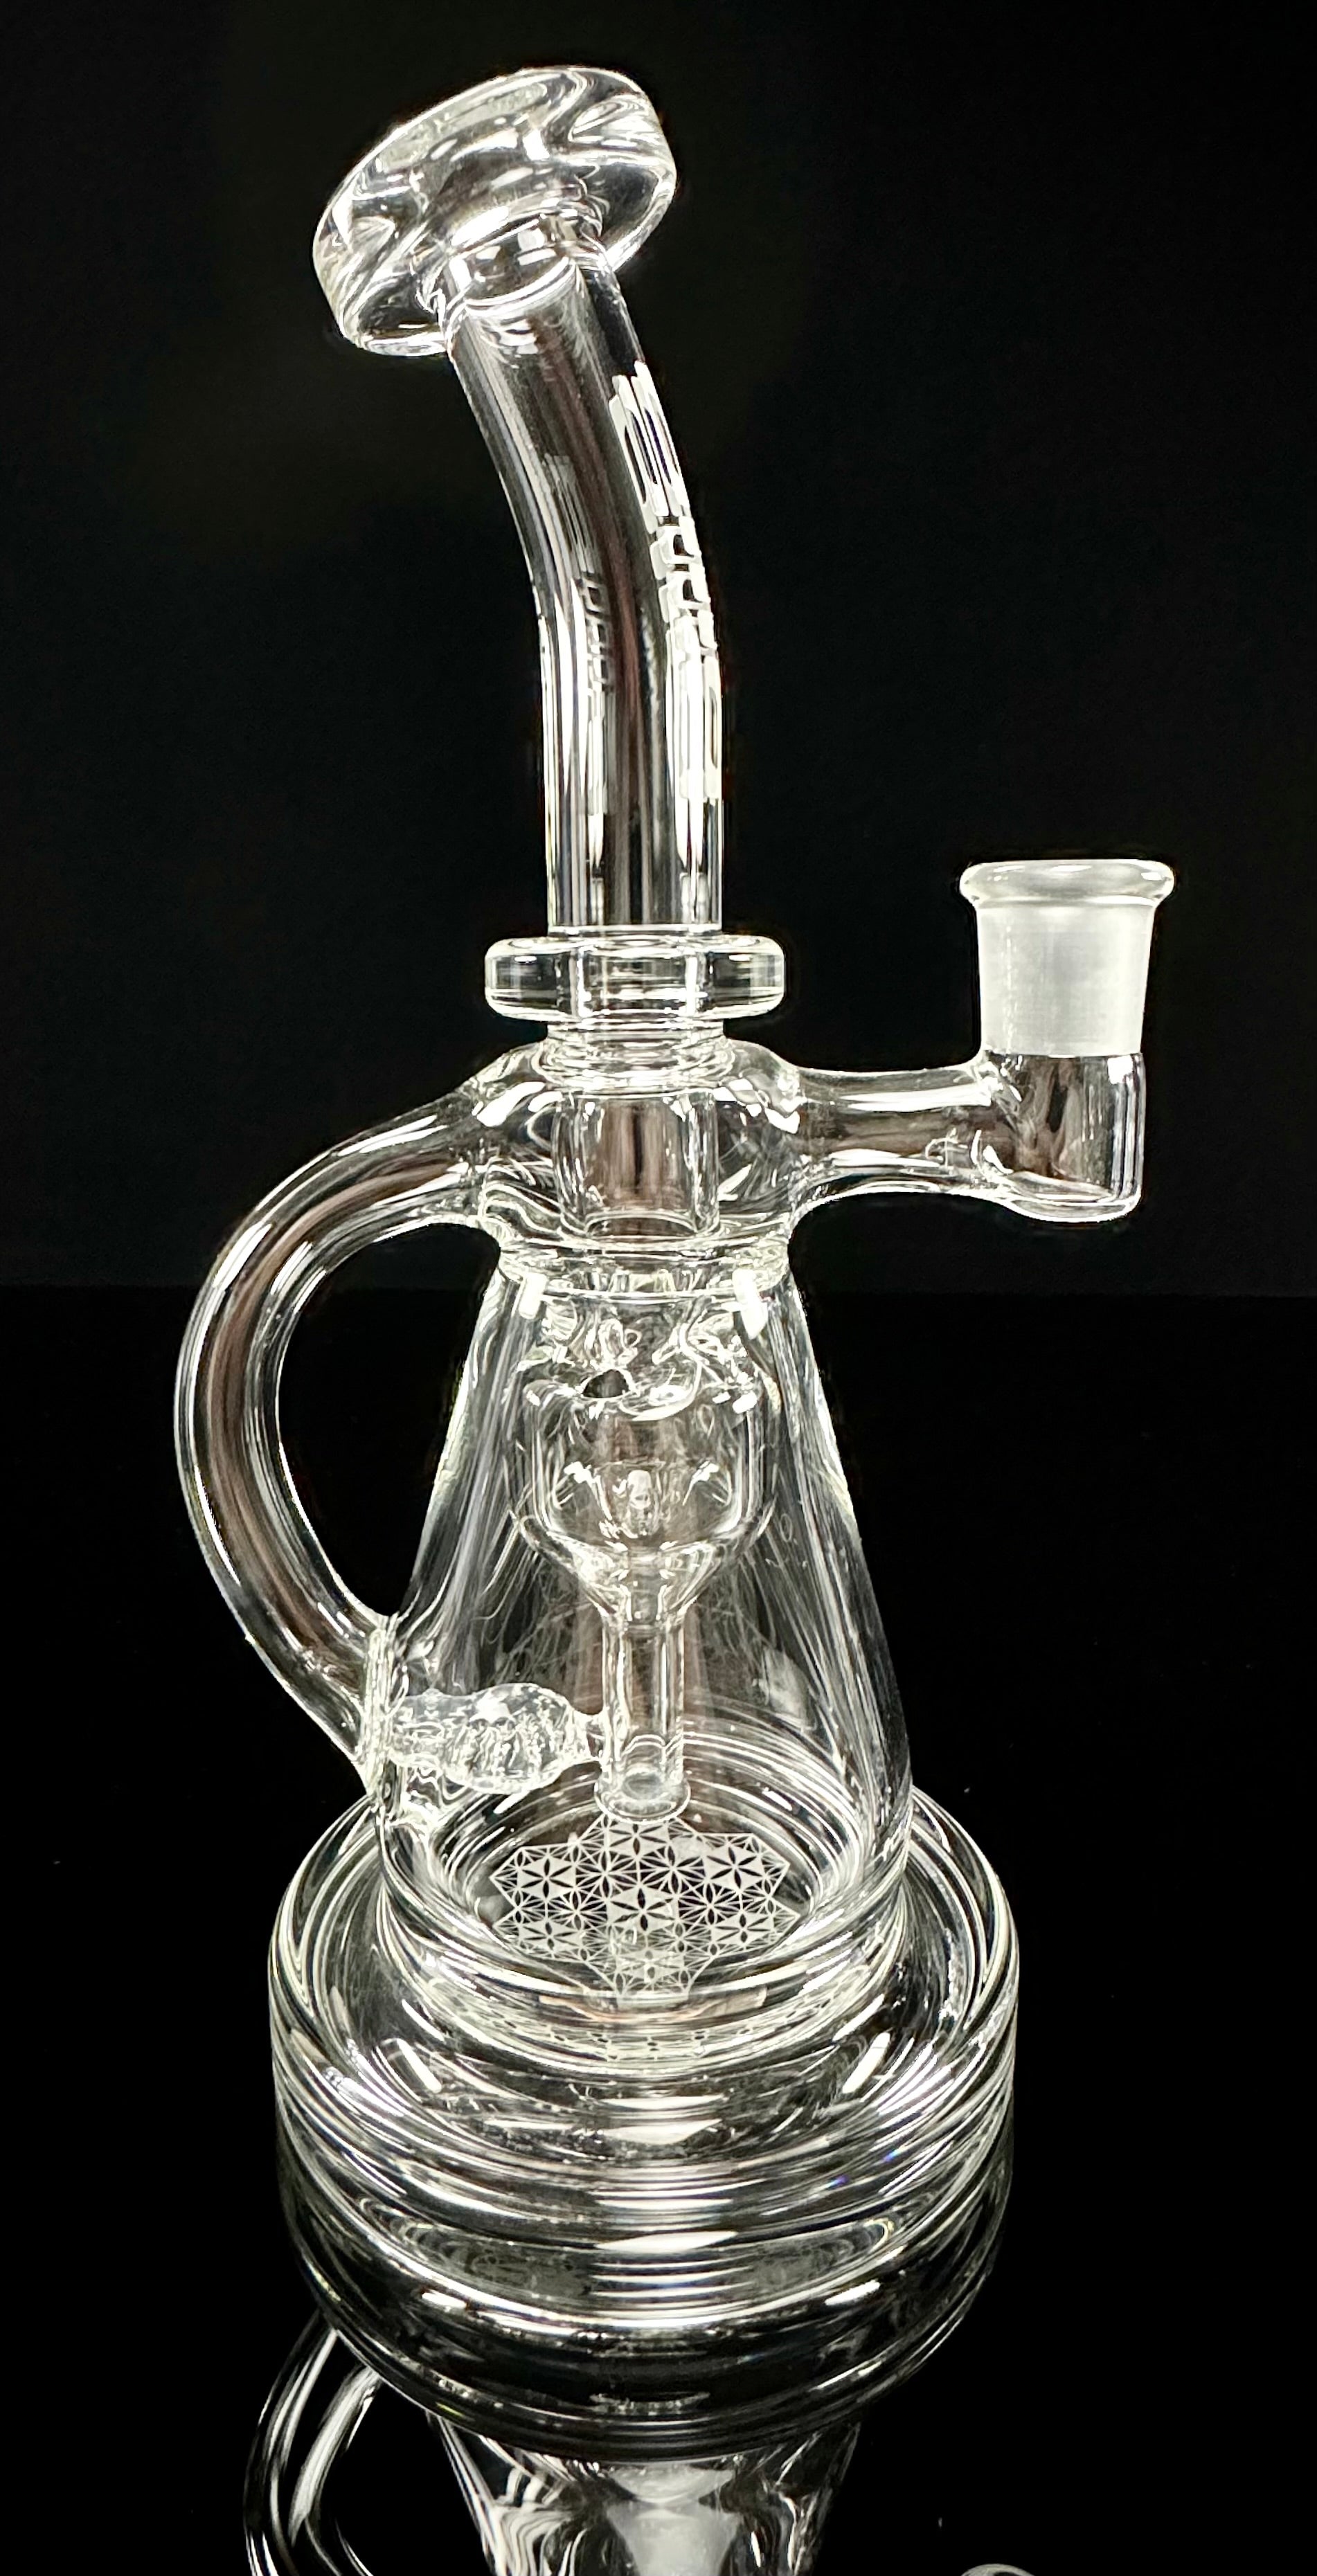 ILL Glass Fusion B Incycler